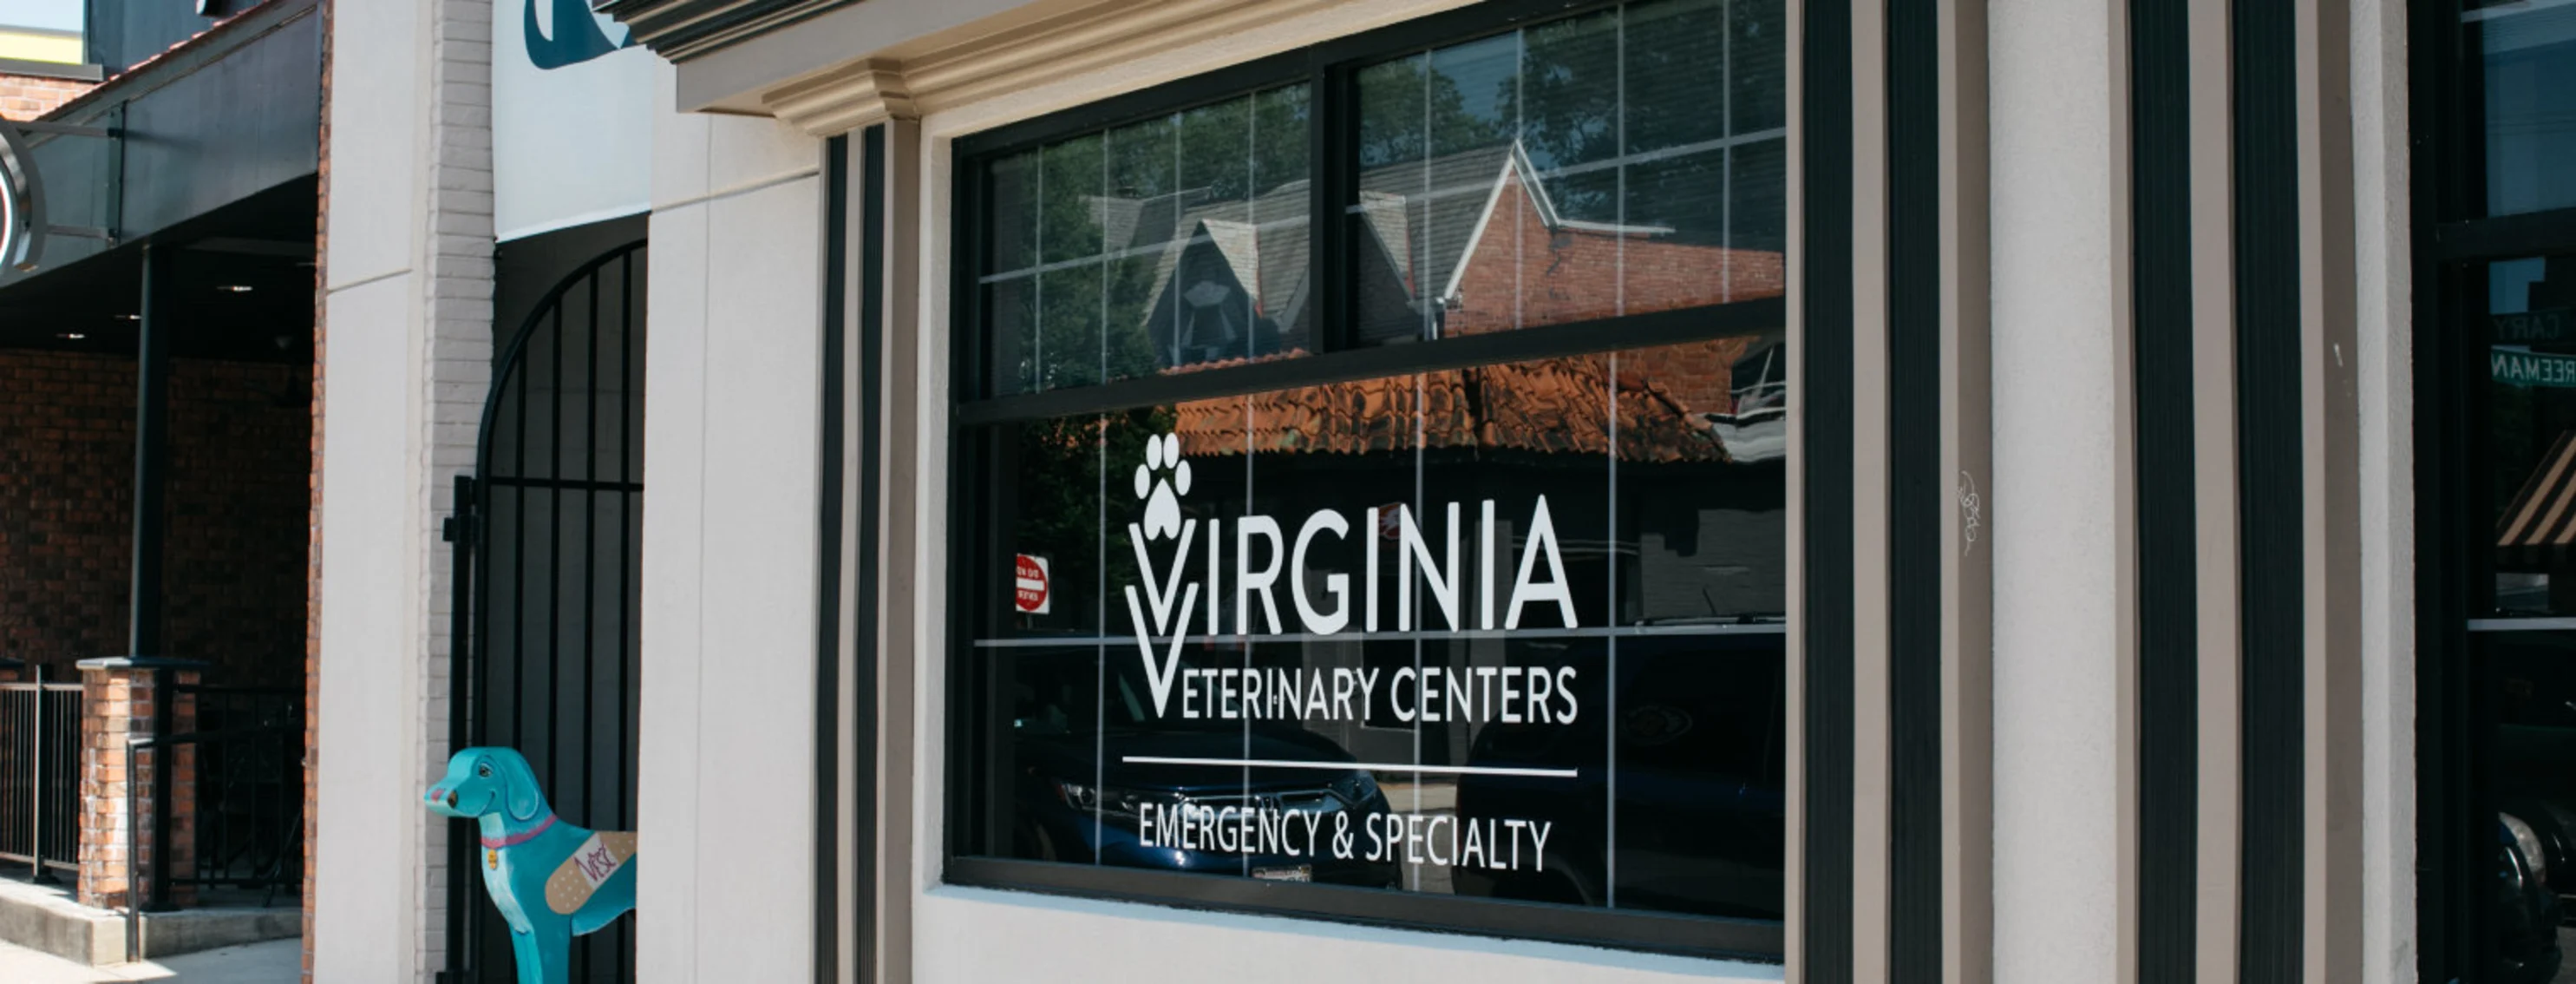 Store front with window that reads Virginia Veterinary Centers Emergency & Specialty